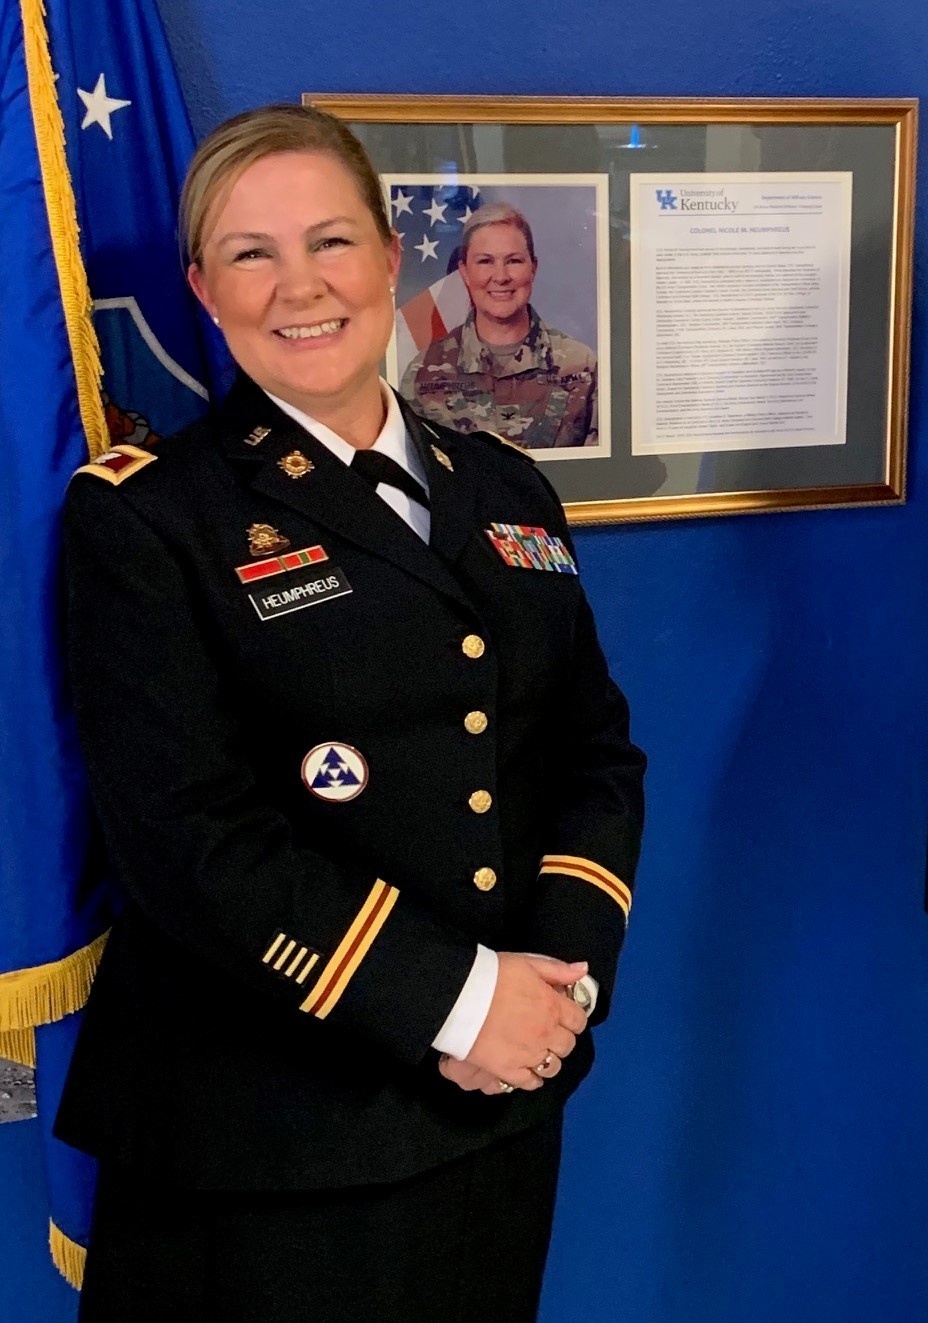 Operations chief joins alma mater’s wall of honor